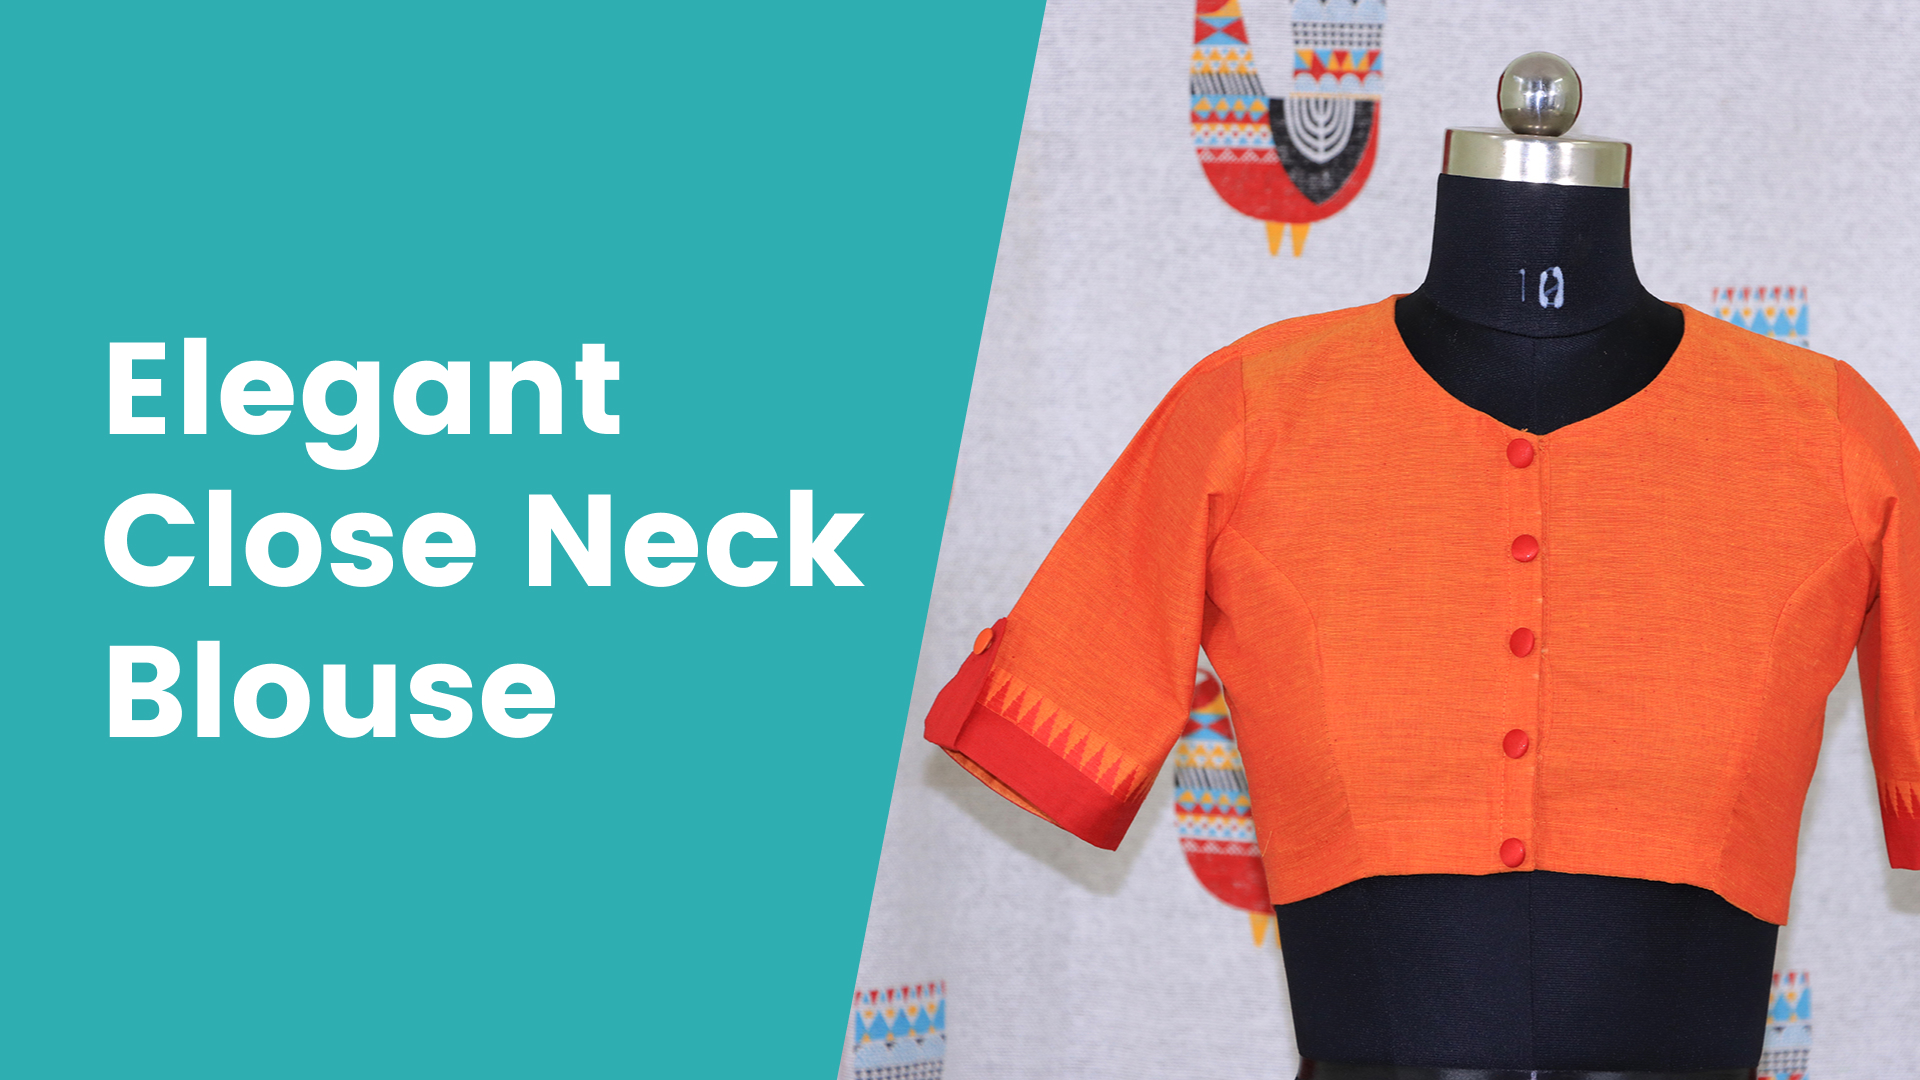 Course Trailer: Learn to Stitch a Close Neck Blouse. Watch to know more.